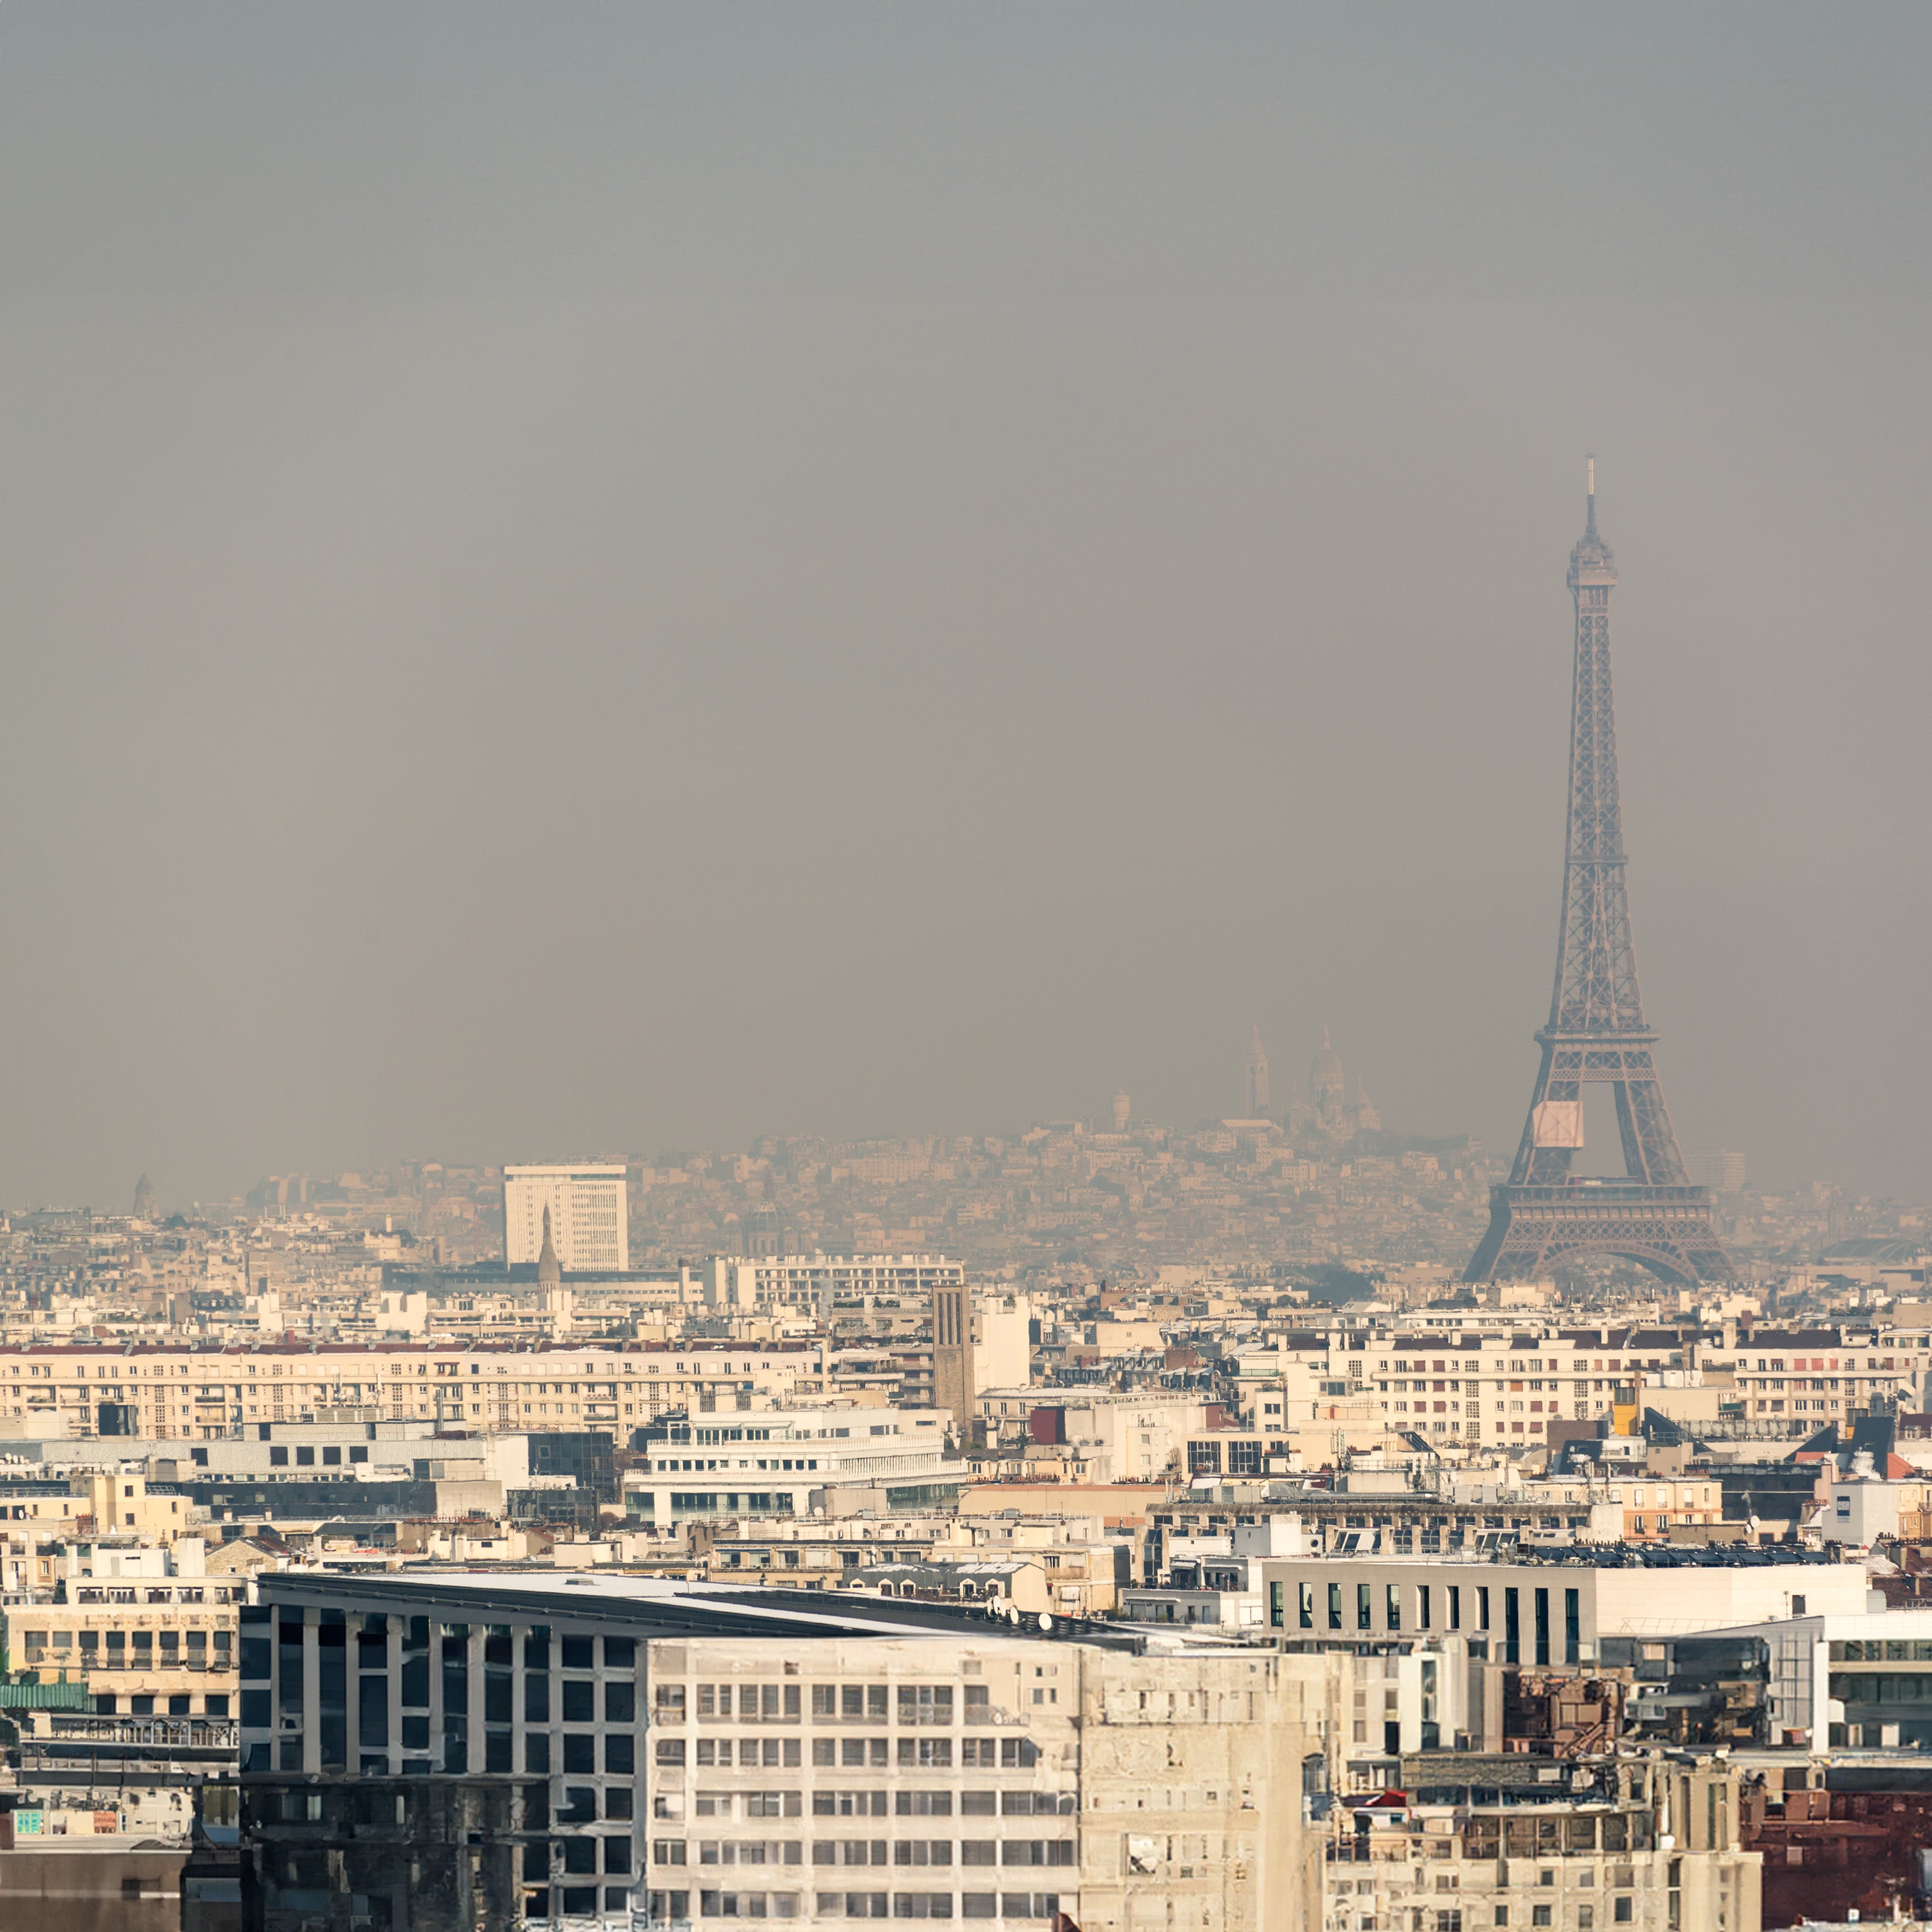 Striking view of environmental pollution in Paris with the Eiffel Tower in the background, highlighting the need for protection against external aggressions.